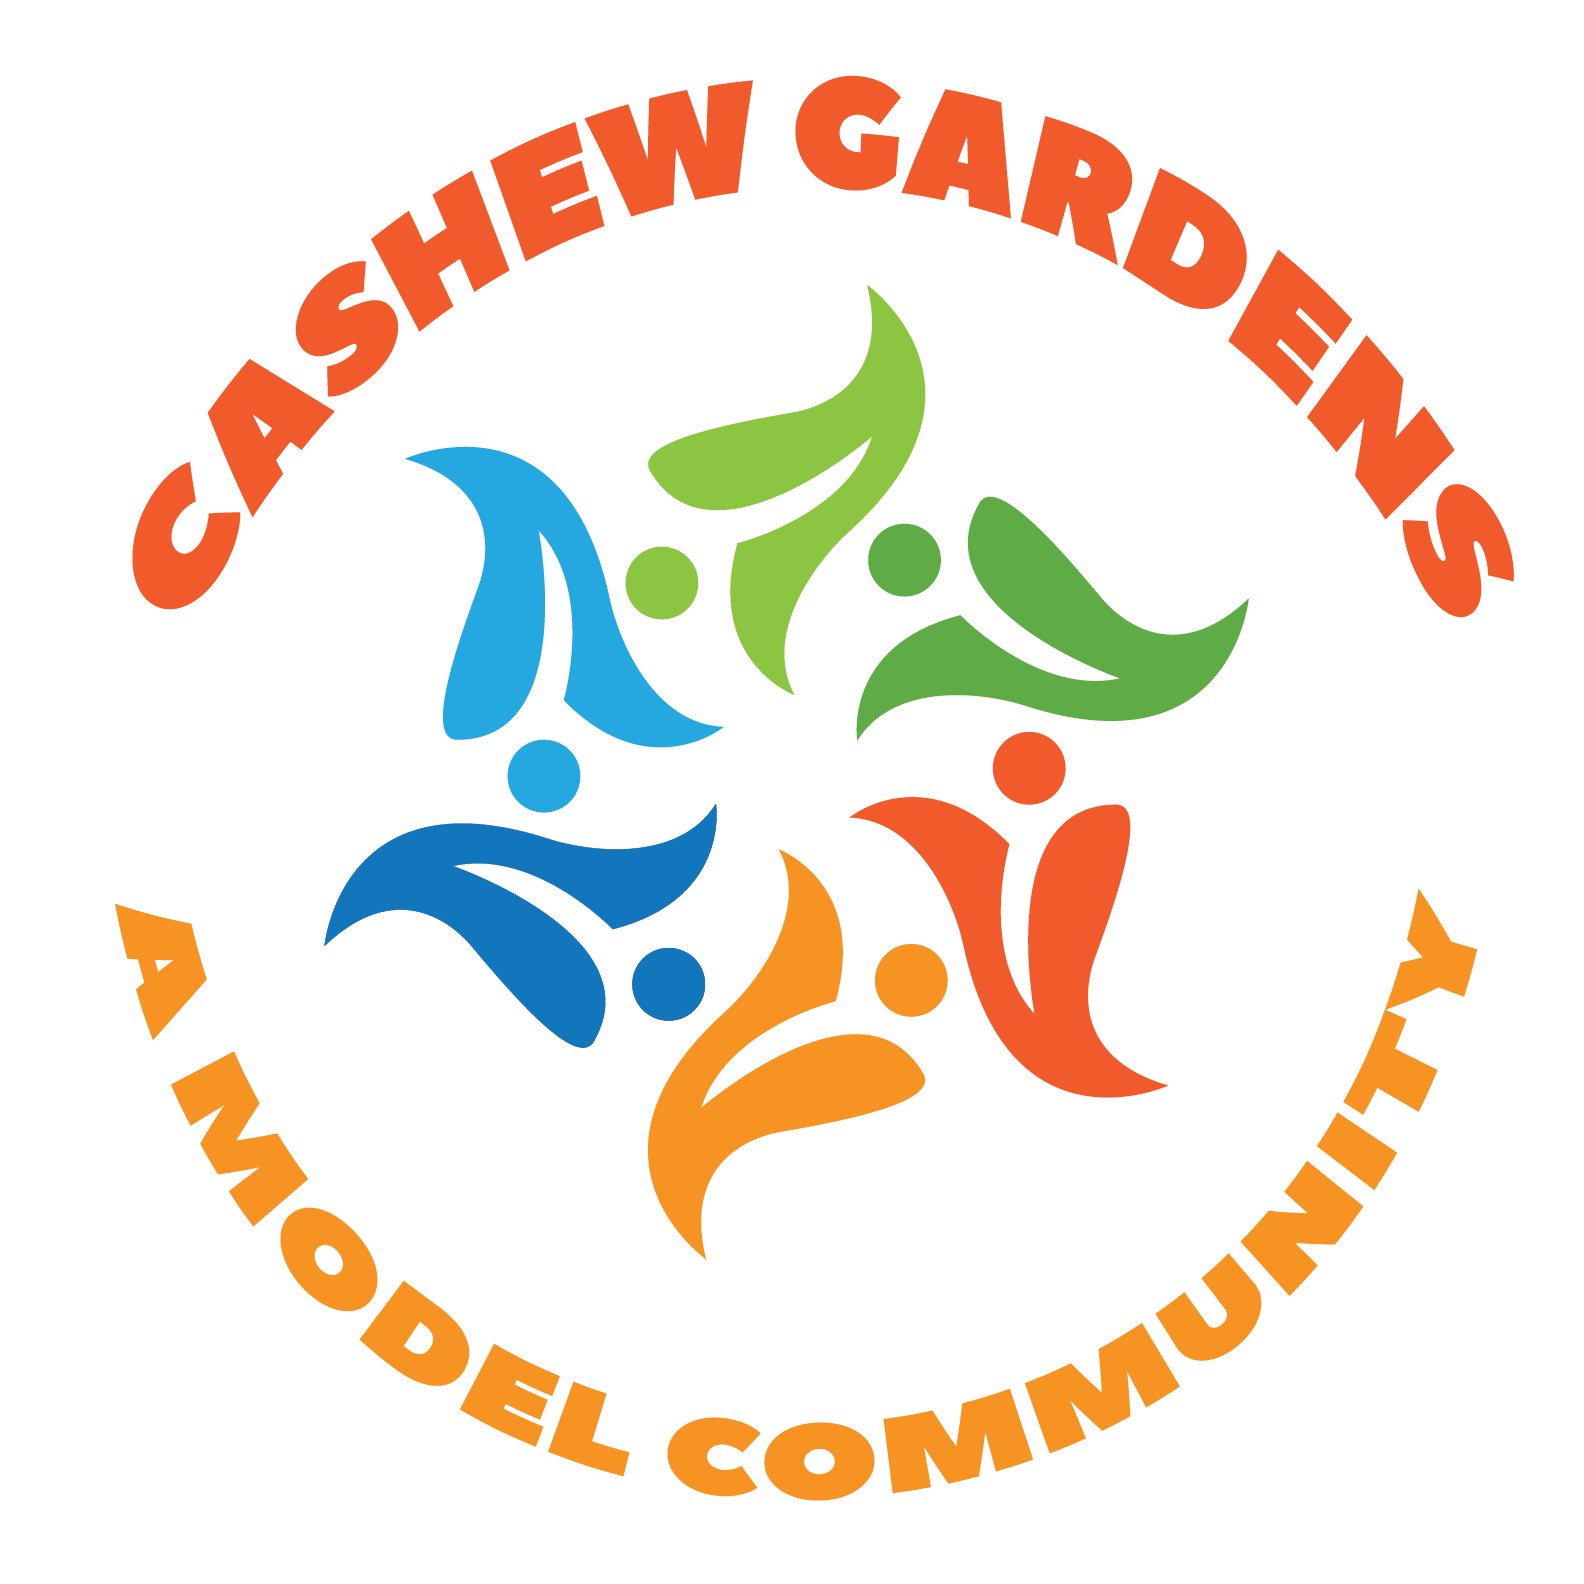 Cashew Garden's endeavors to become 'A Model Community' that represents the cohesiveness of teamwork, love and country. #recycling #community #volunteerism